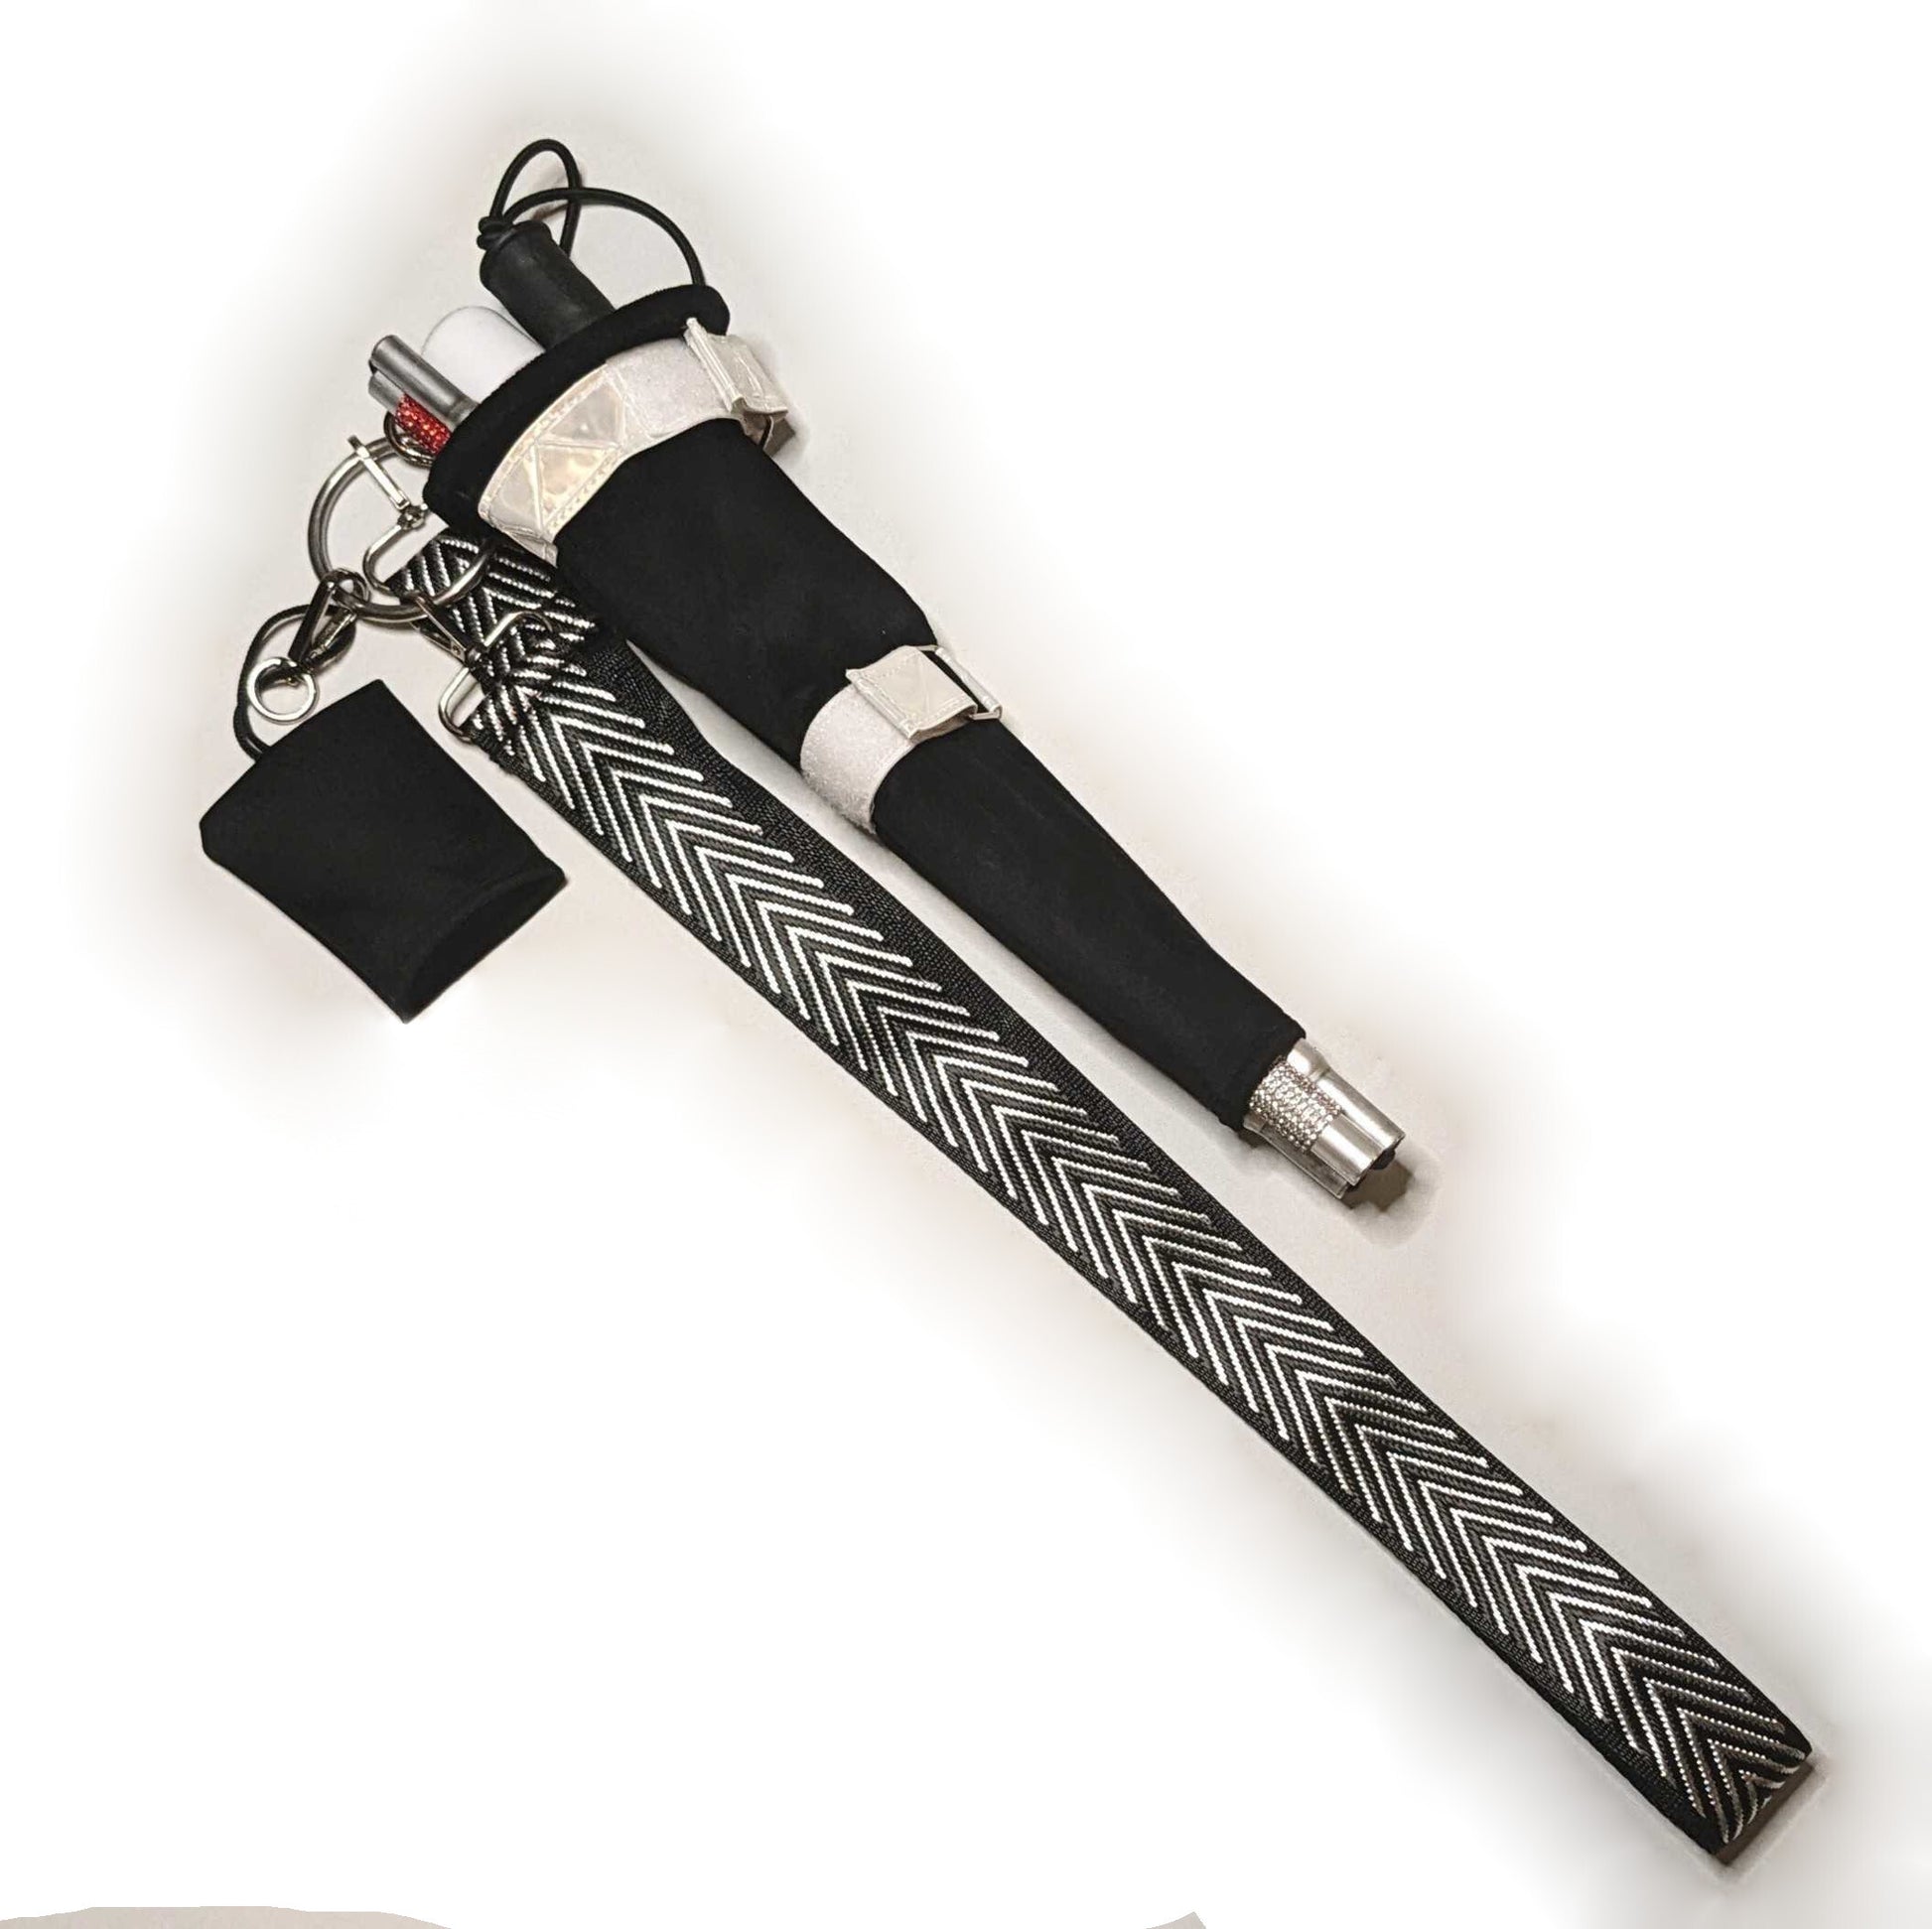 A black and white Kane Keeper bag to hold the Glam Cane.